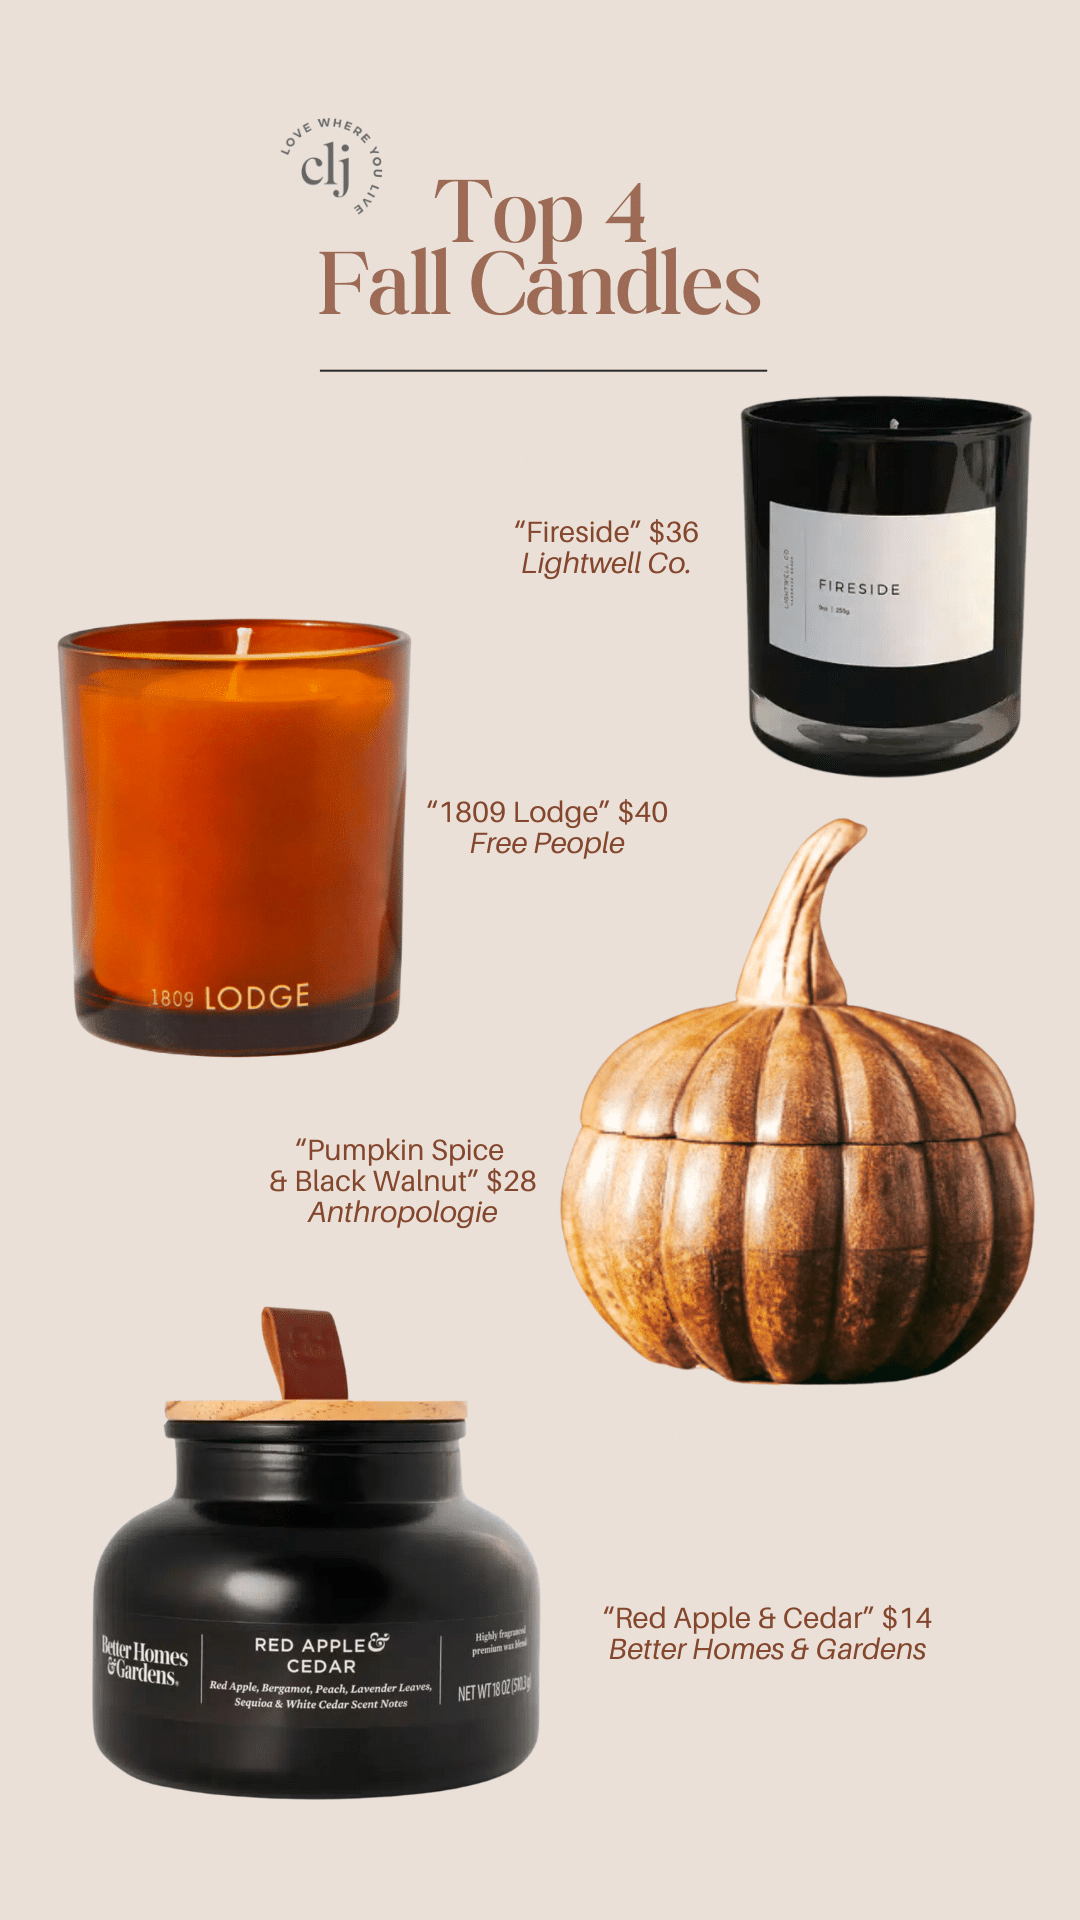 Top 4 Fall Candles